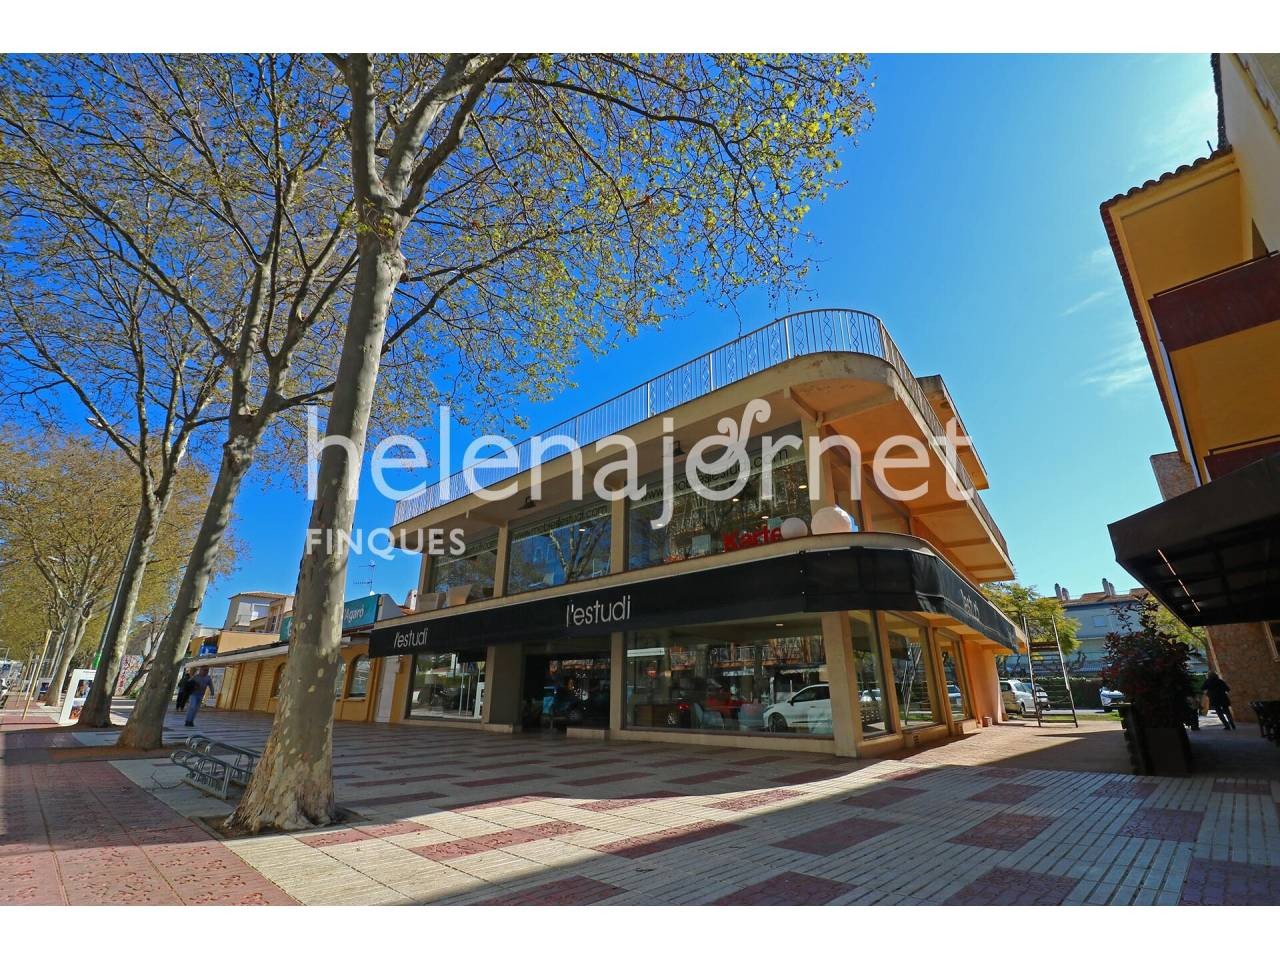 493 m2 local located in the center of S’Agaró - 1571